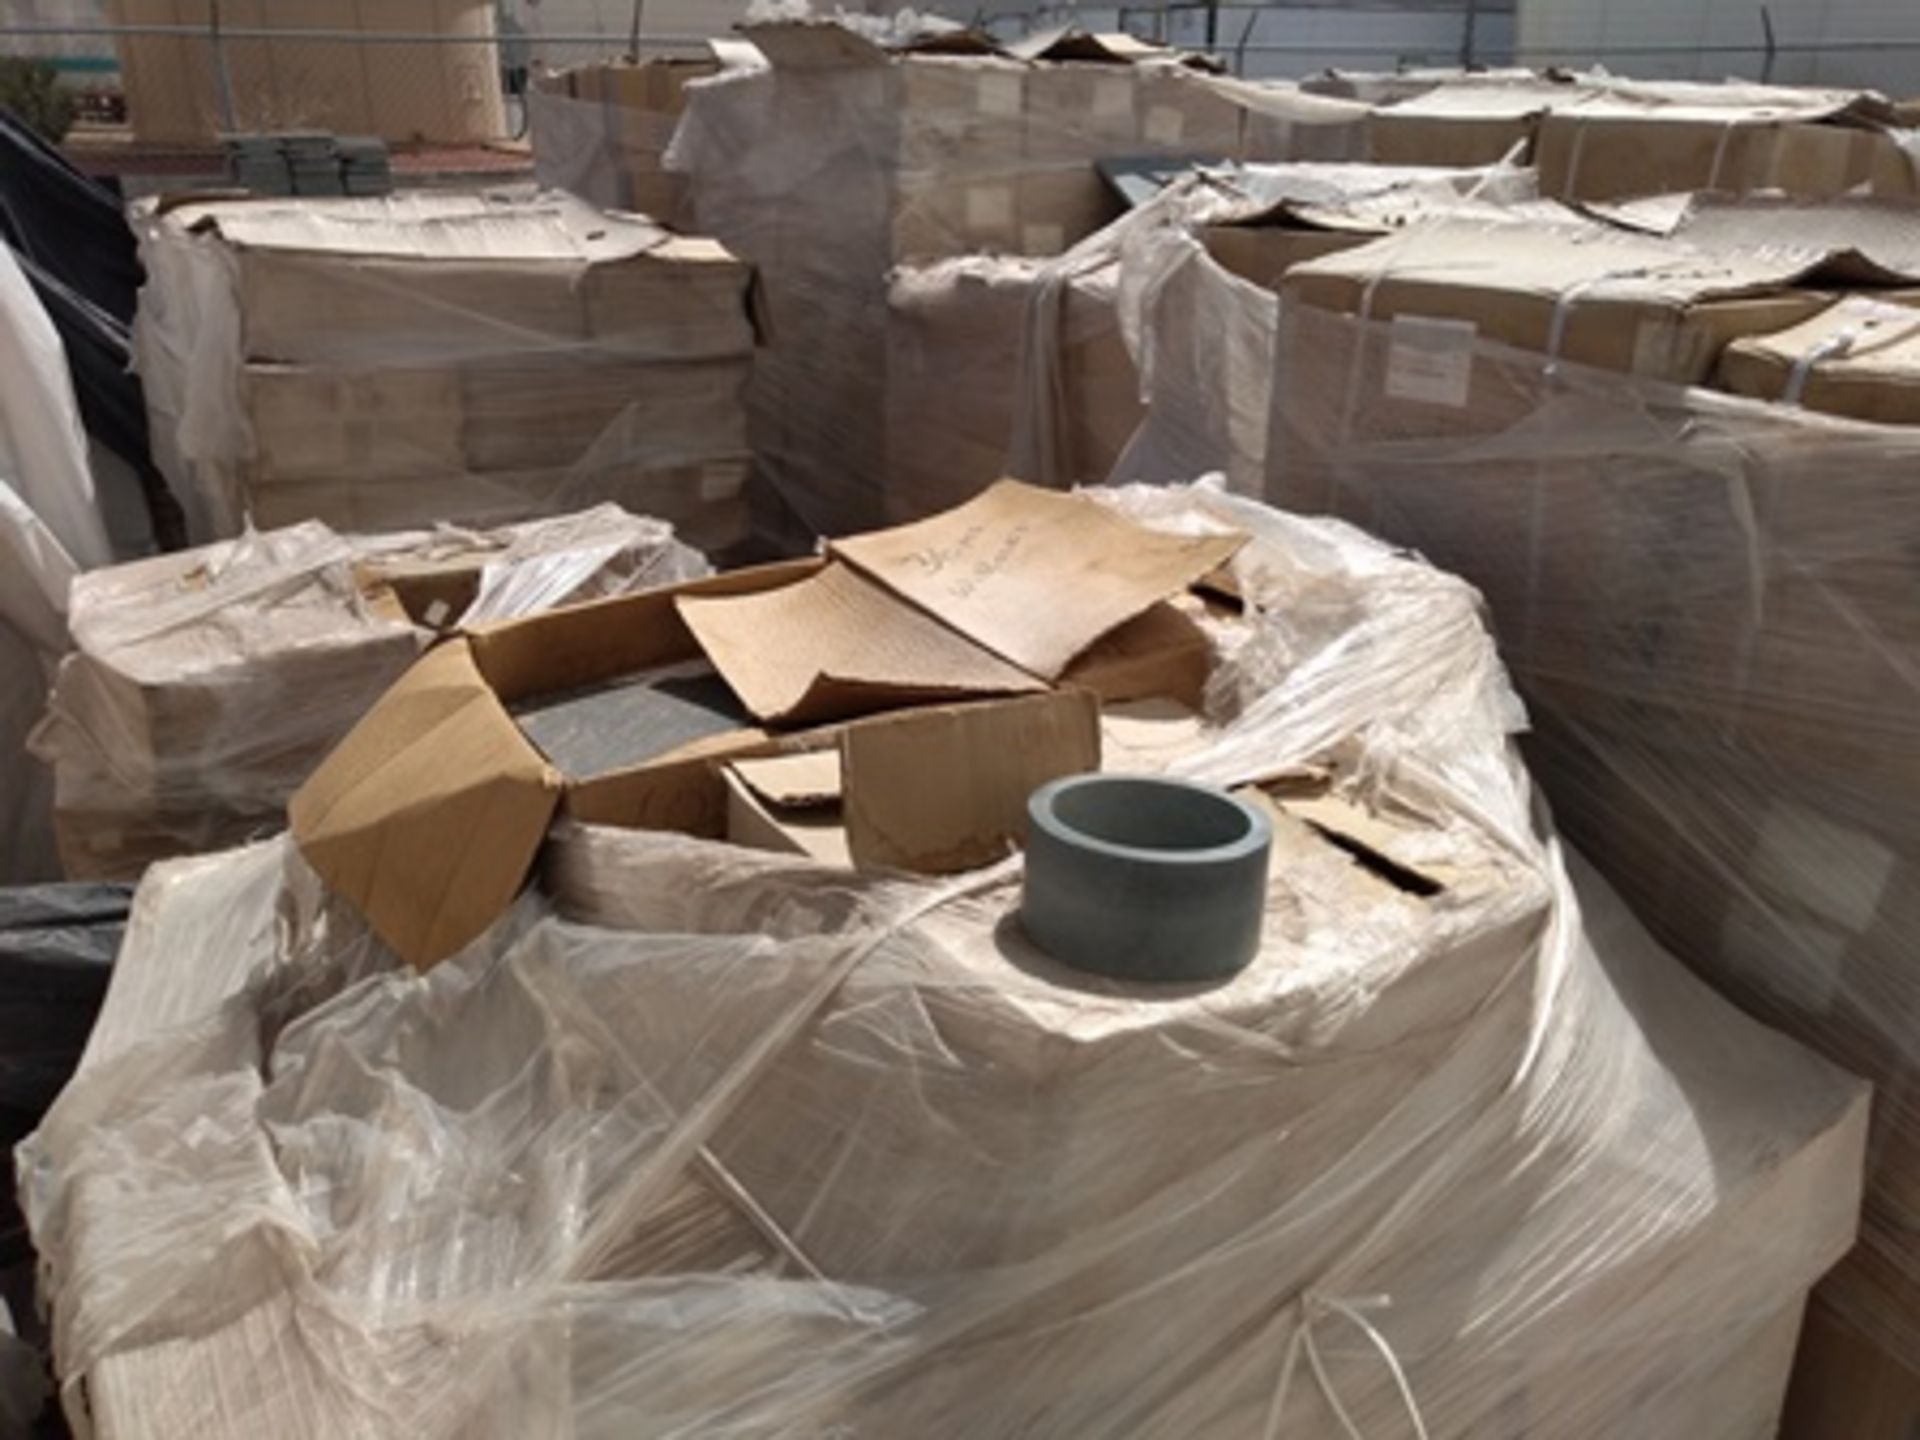 18 pallets containing: 600 boxes of finished product (egraved and shaped esteatita stones). - Image 25 of 27